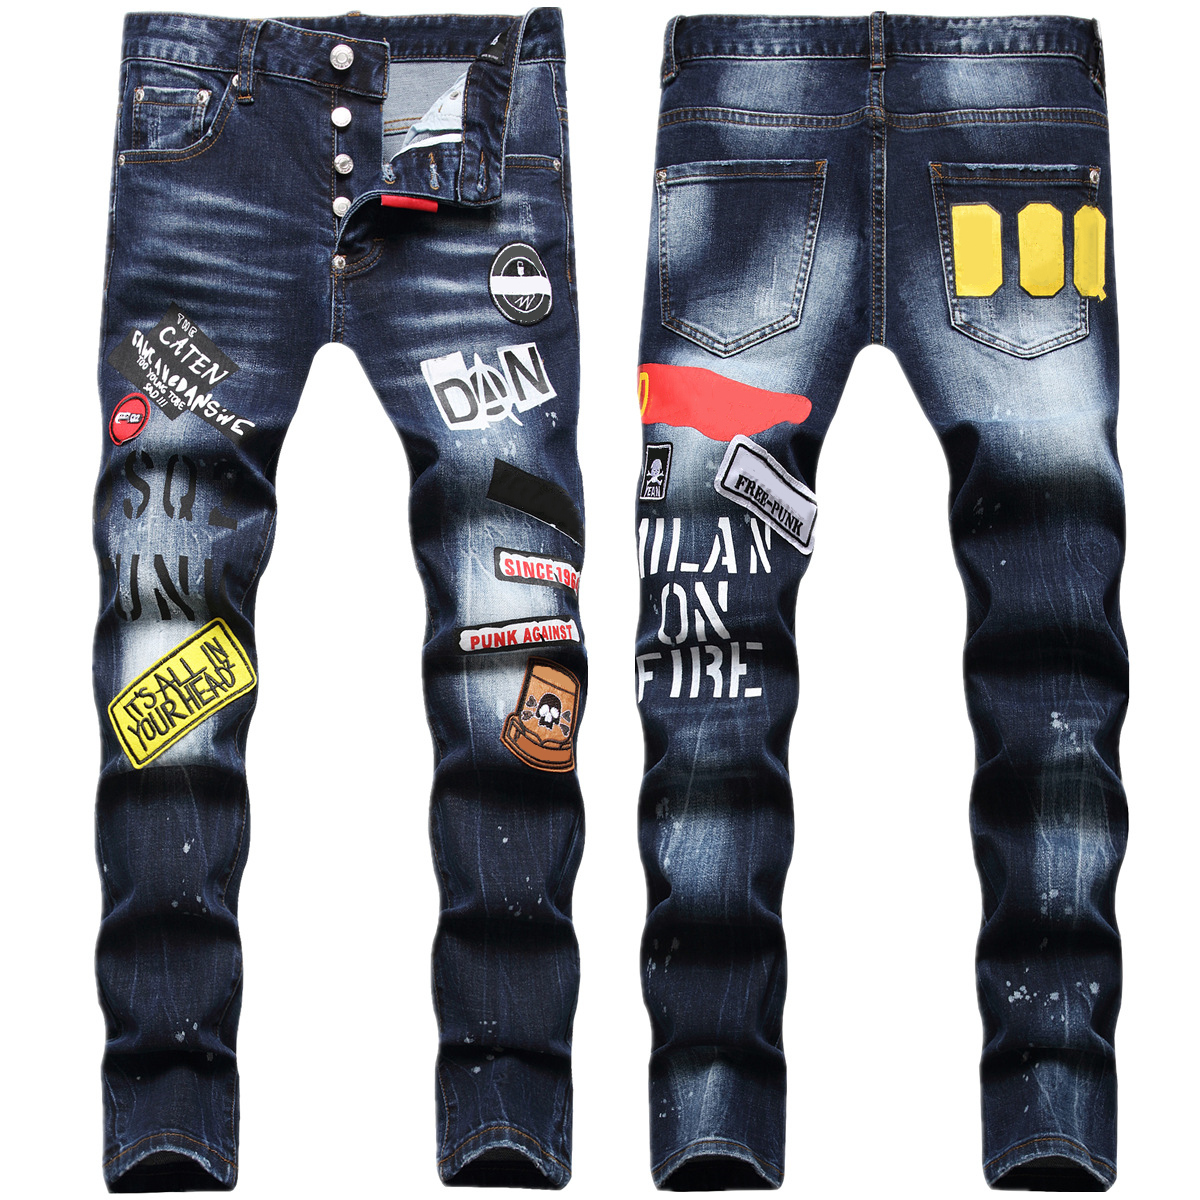 Image of Mens Jeans men jean Hip hop pants street trend Zipper chain decoration ripped Rips Stretch Black Fashion Slim Fit Washed Motocycle Denim Pan